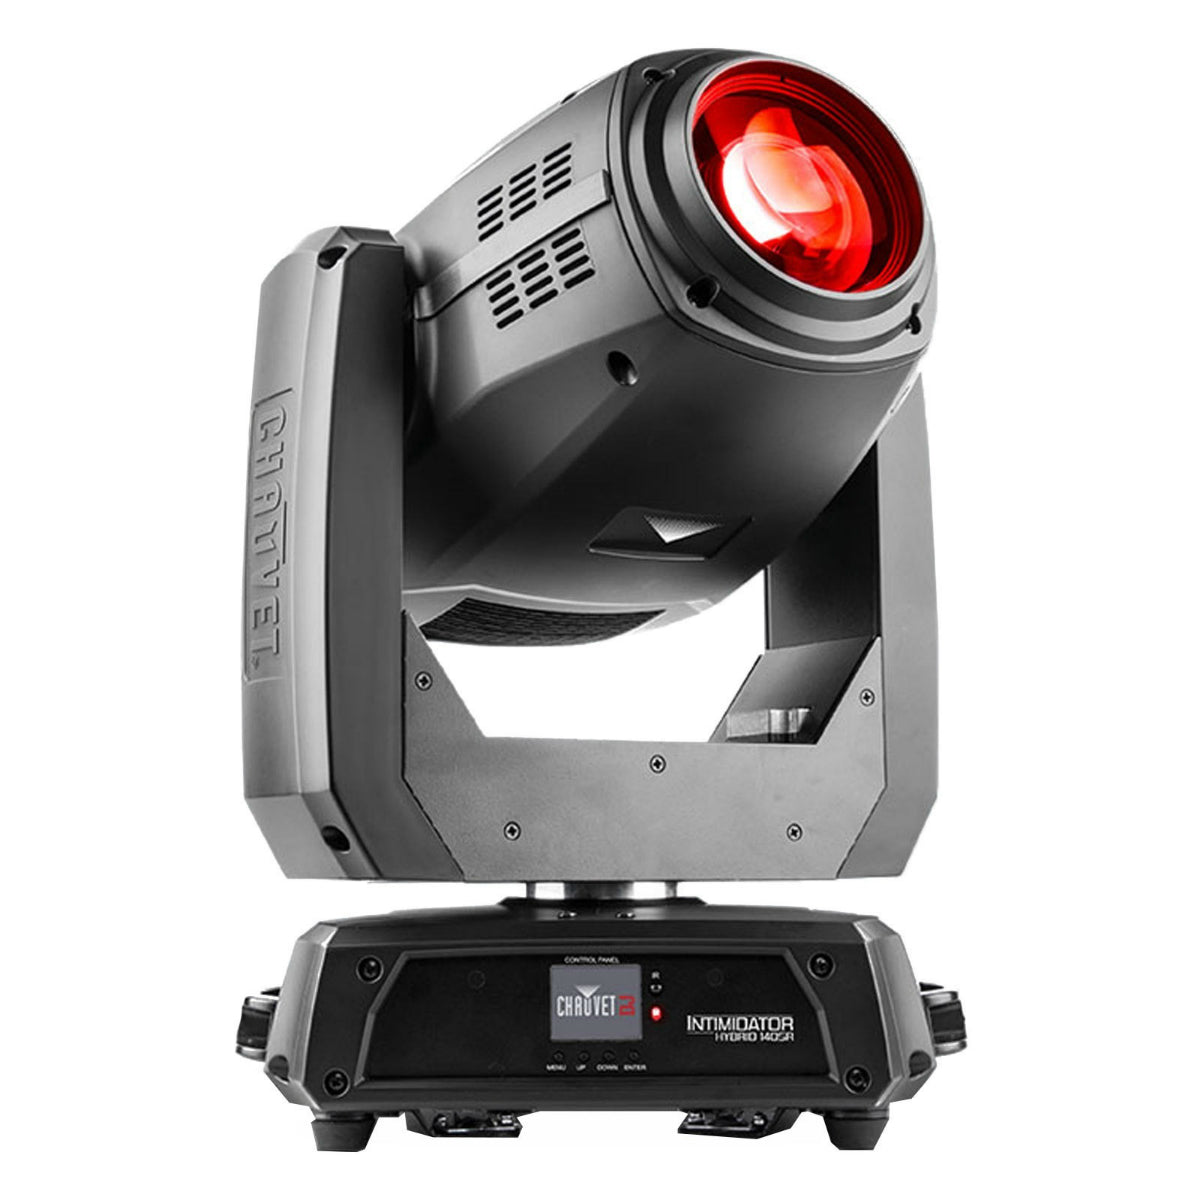 Chauvet Intimidator Hybrid 140SR All-In-One Moving Head